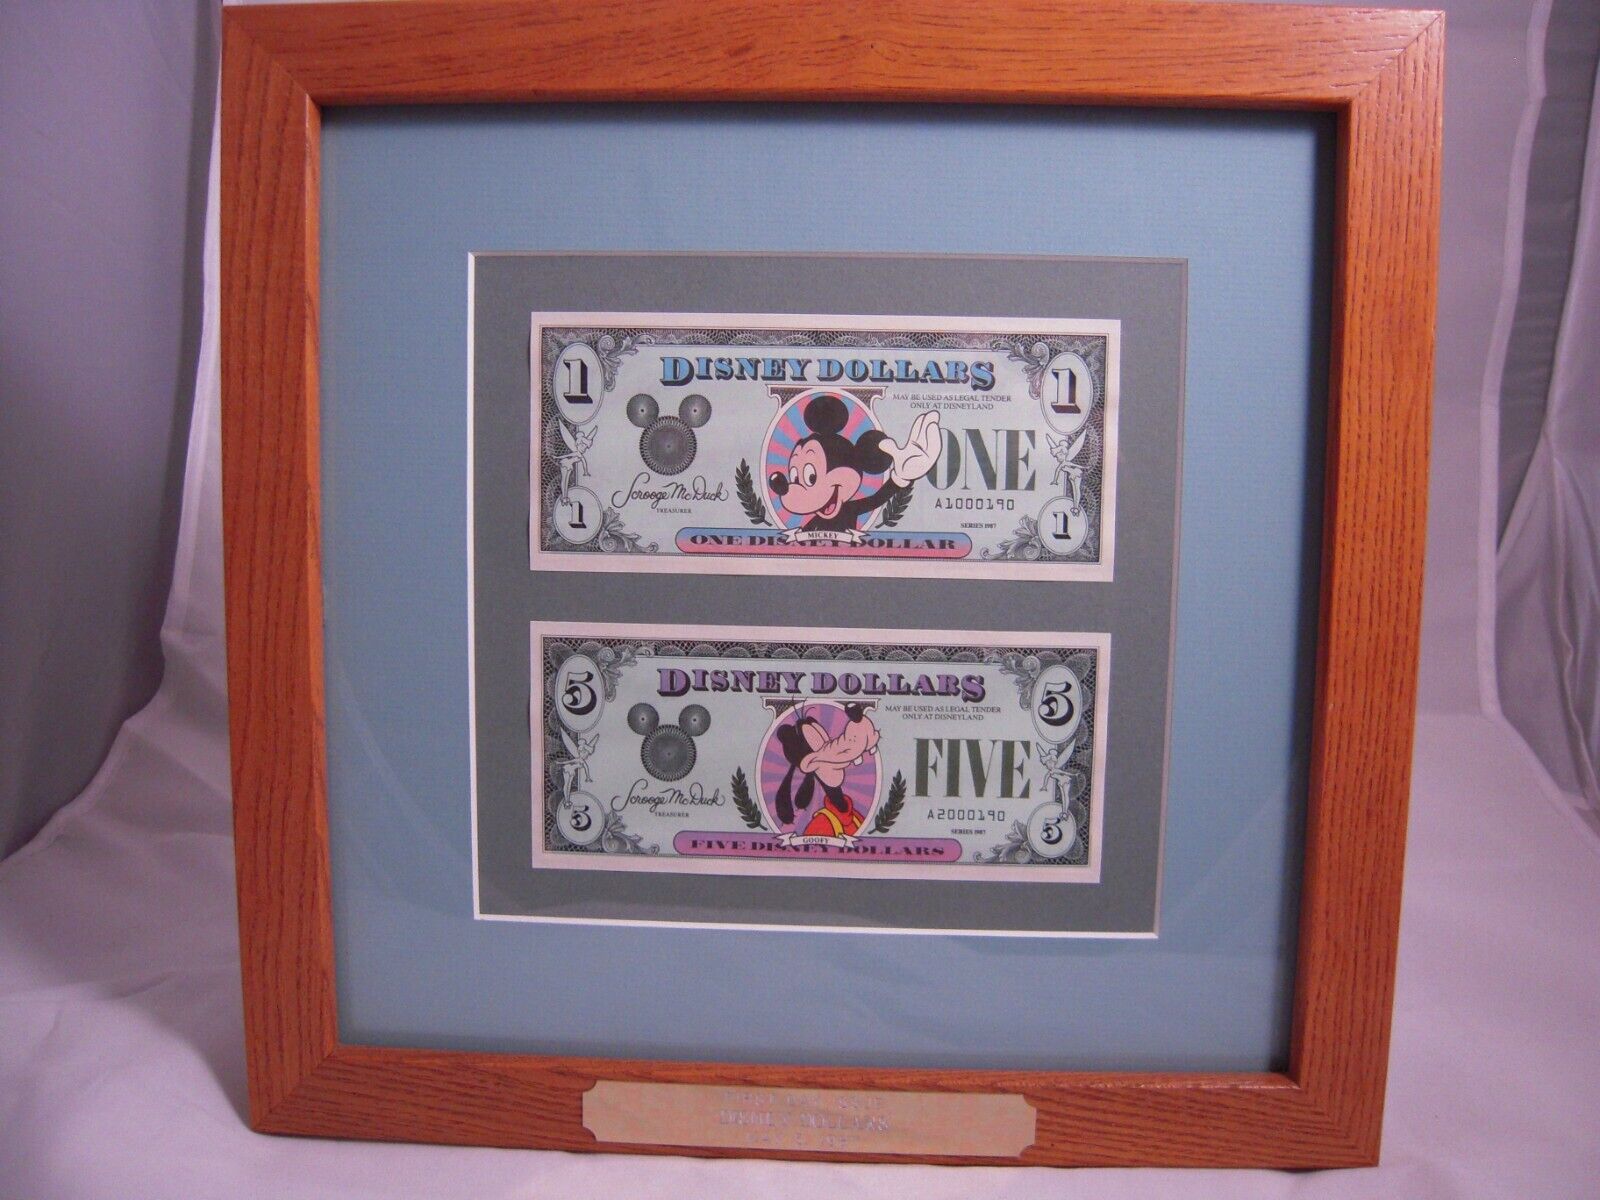 1987 1st Day Issue Disney Dollars, Disneyland $1 and $5 notes LOW Matching #'s